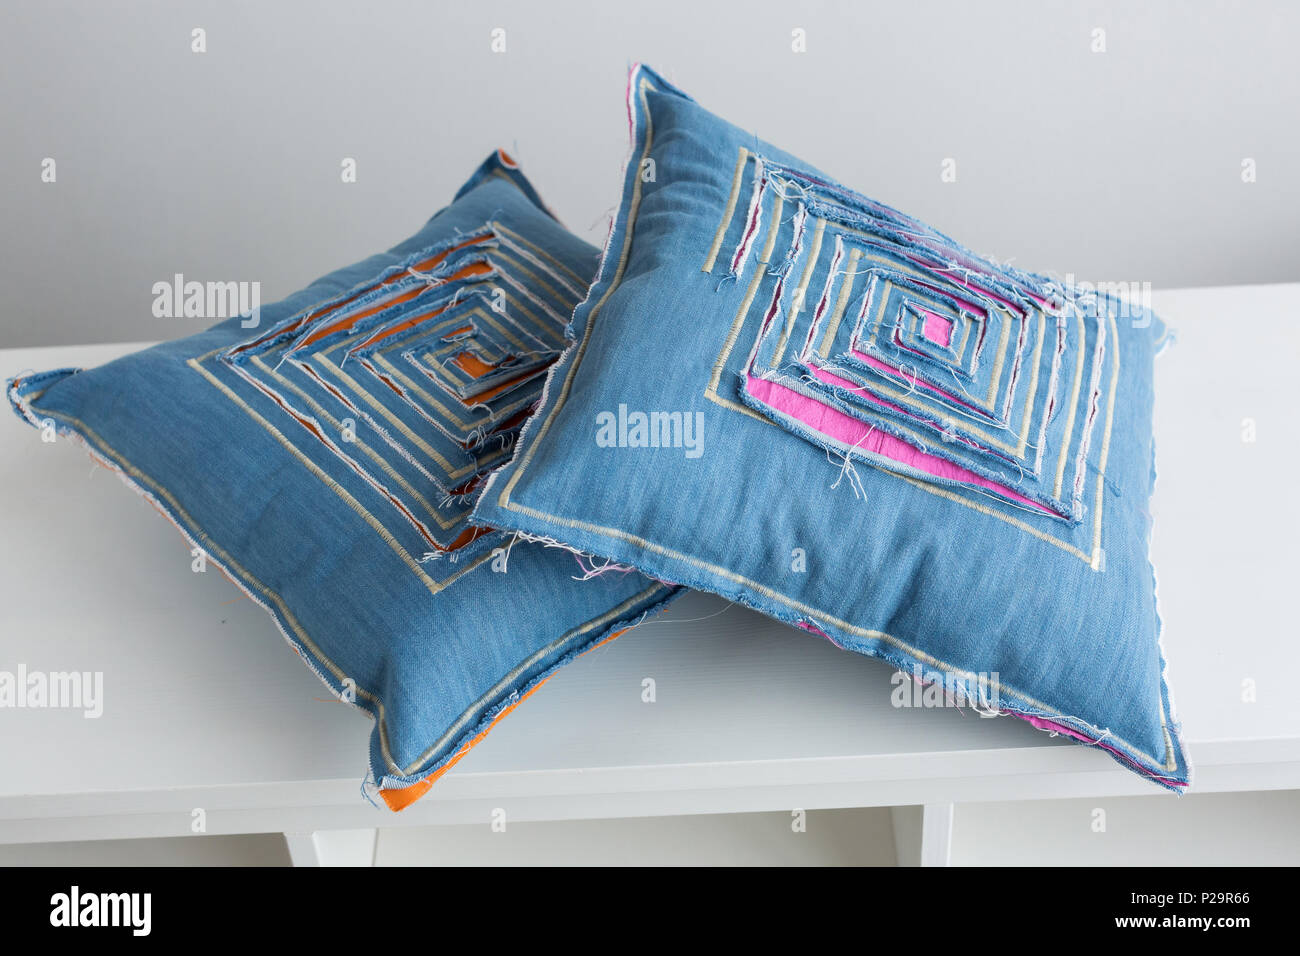 handmade, interior design, decoration elements concept. there is sinple but original pillowcases that was sewed of jeans fabric, each one has cuts tha Stock Photo